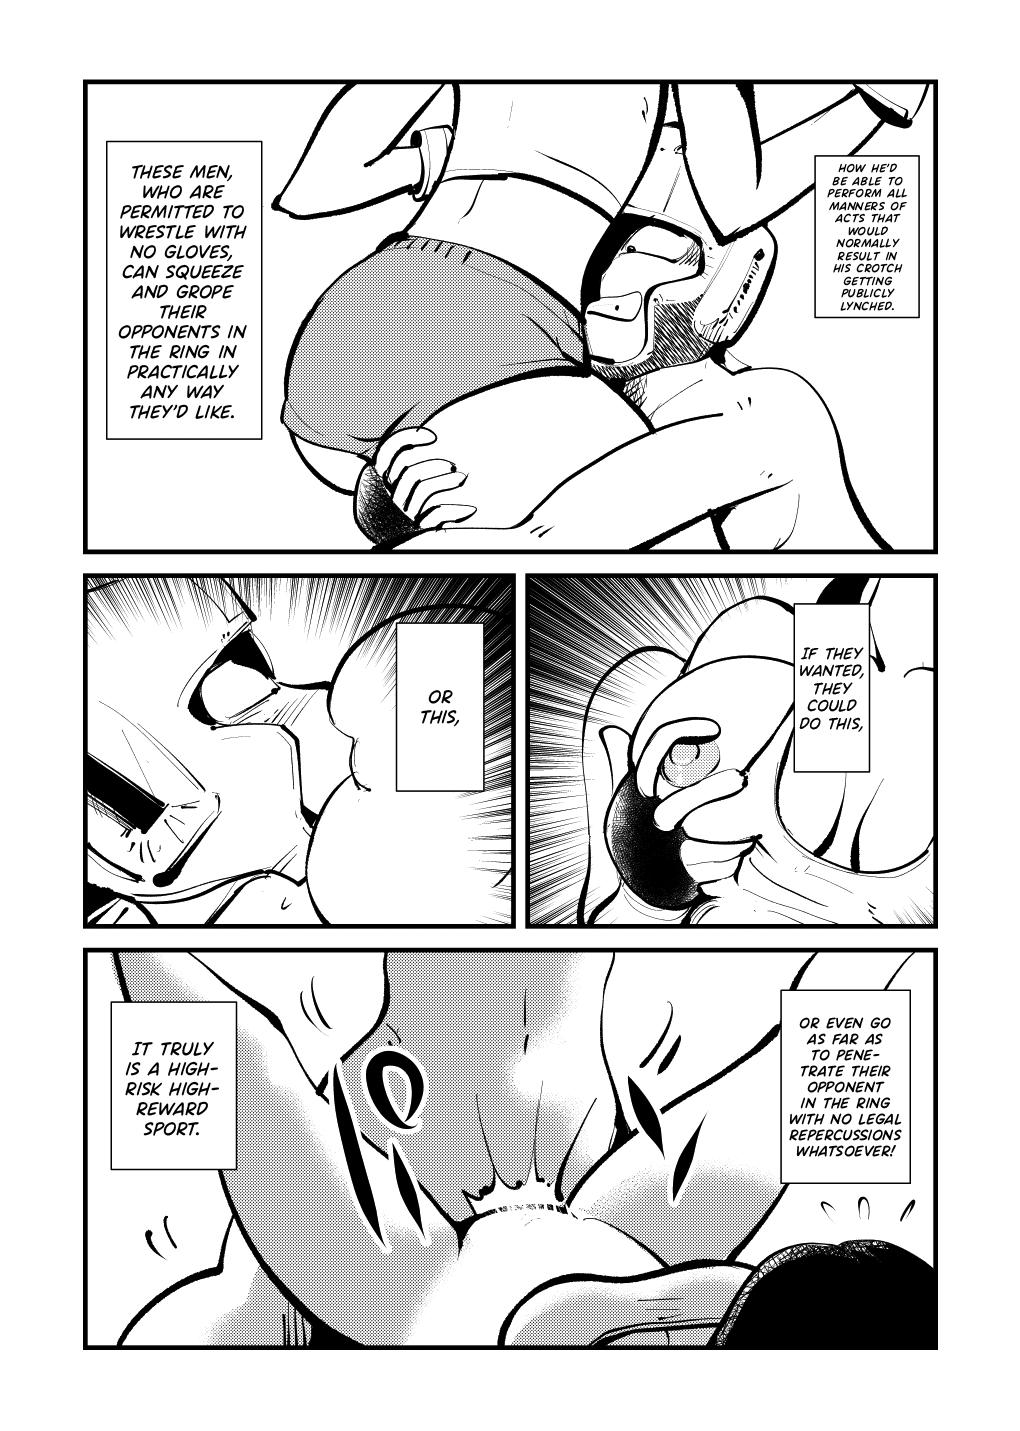 Dancing Dick Boxing Argenta - Page 3